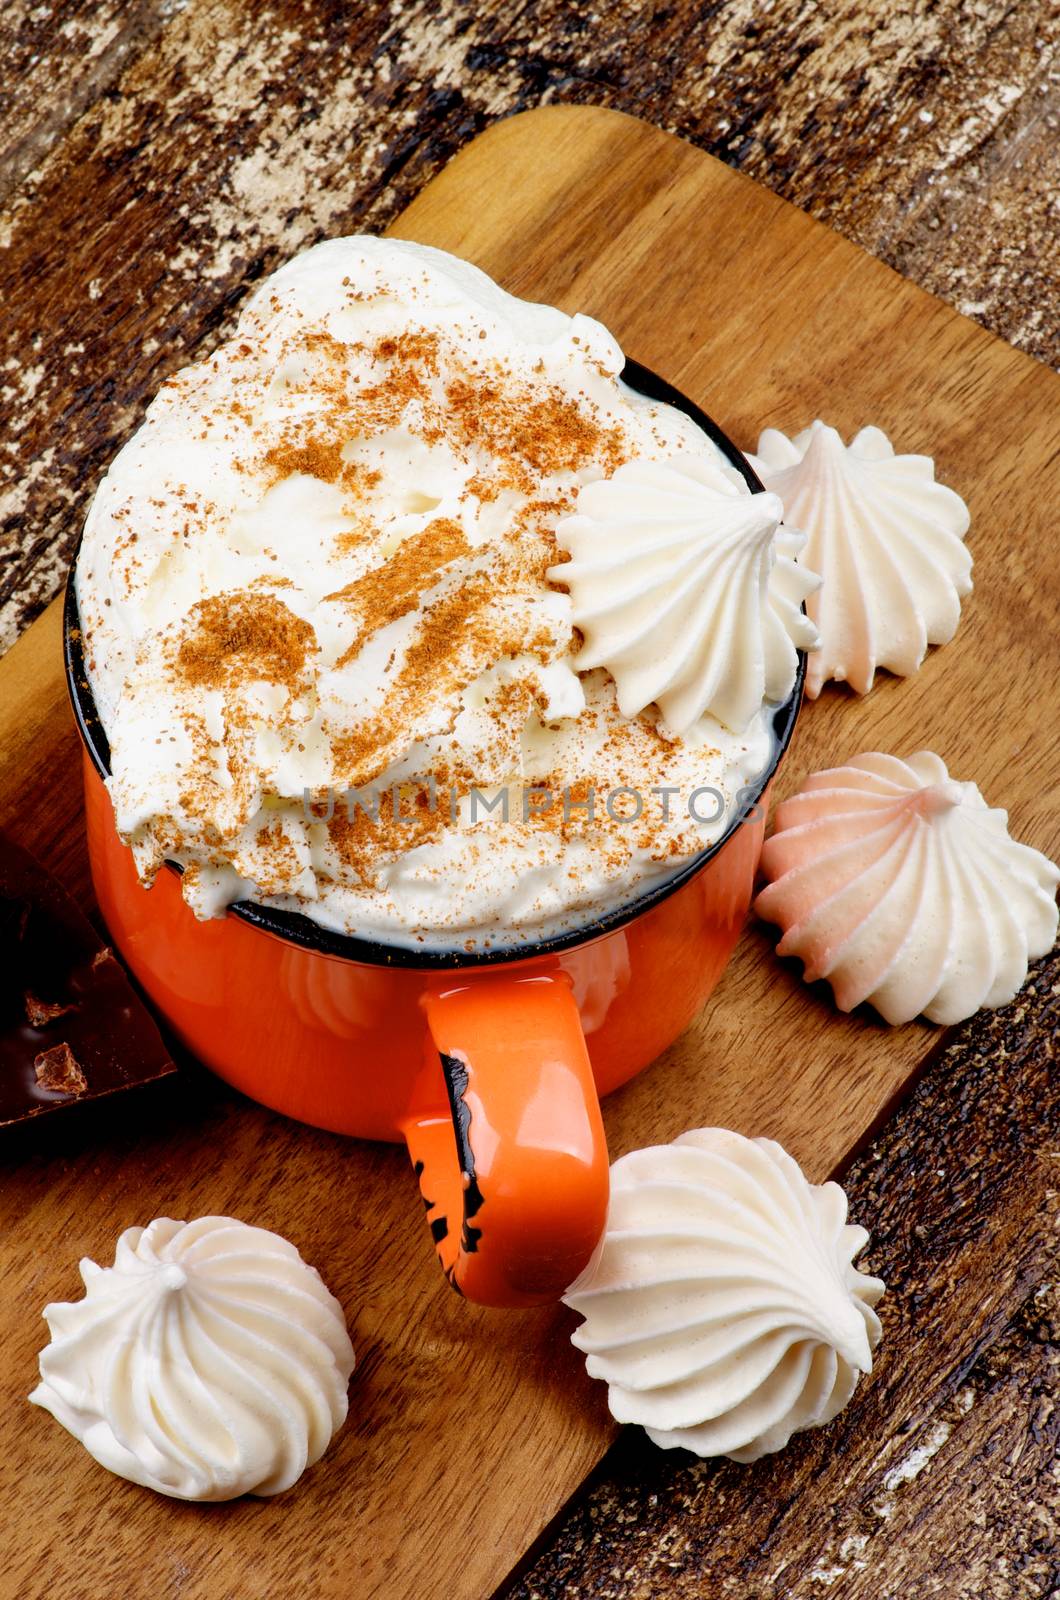 Hot Chocolate with Meringues by zhekos